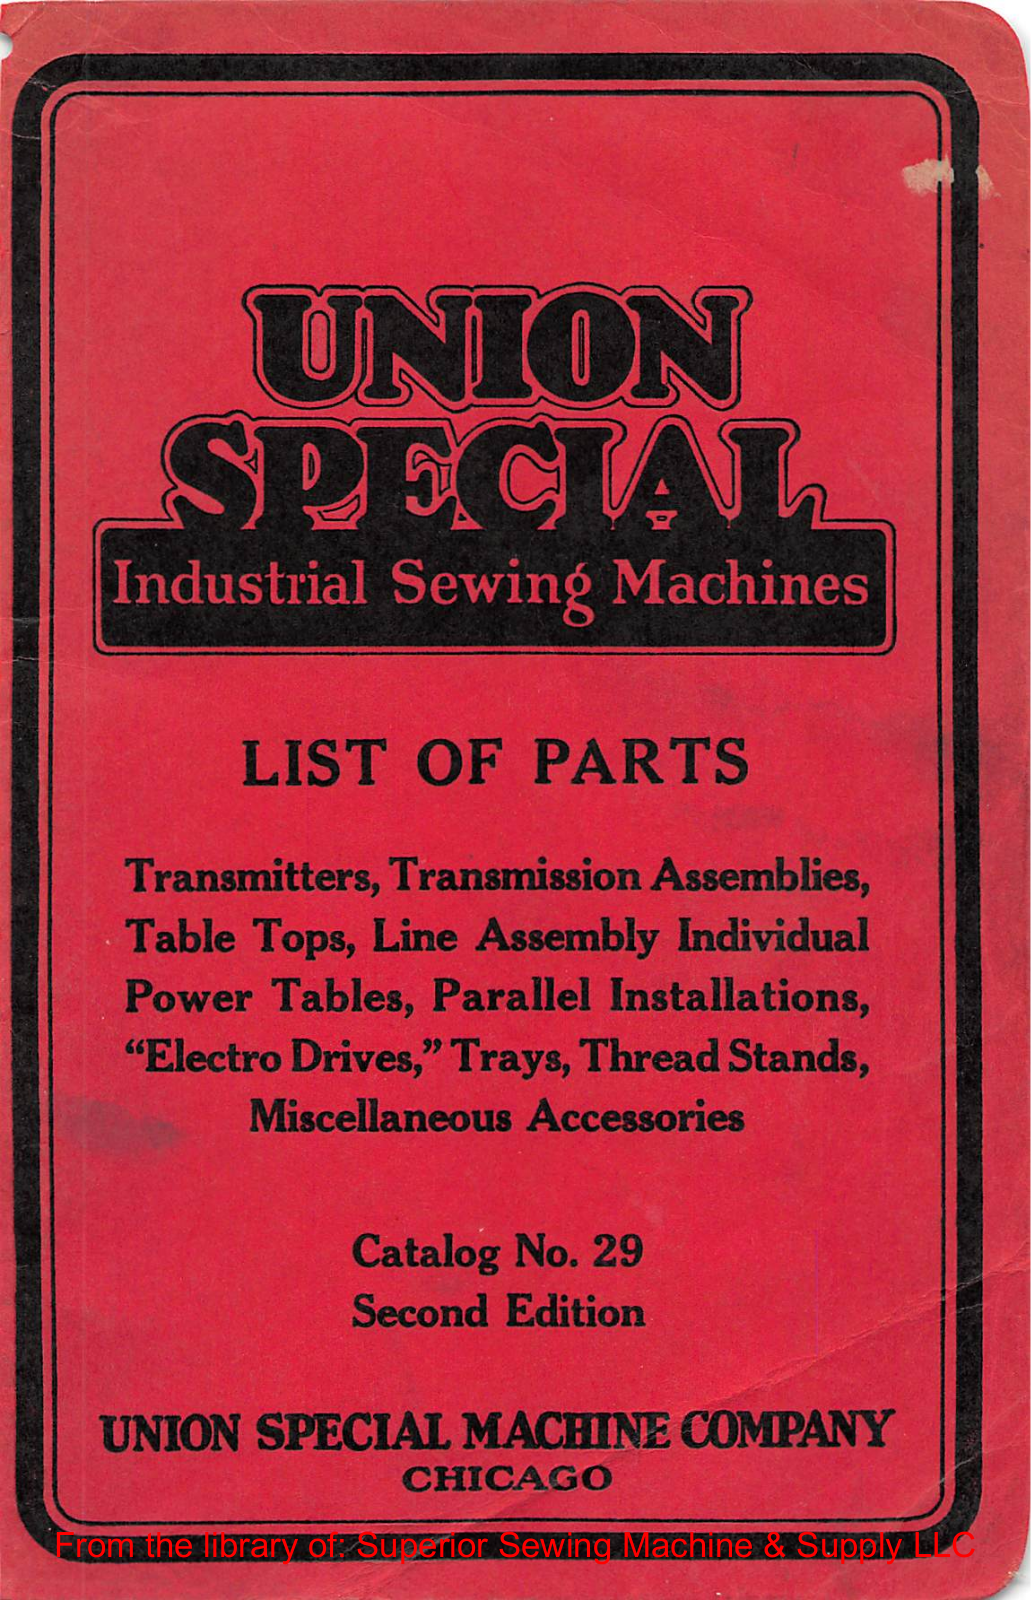 Union Special Trzunsmitters, Transmission Assemblies, Table Tops, Line Assembly Individual Power Tables, 